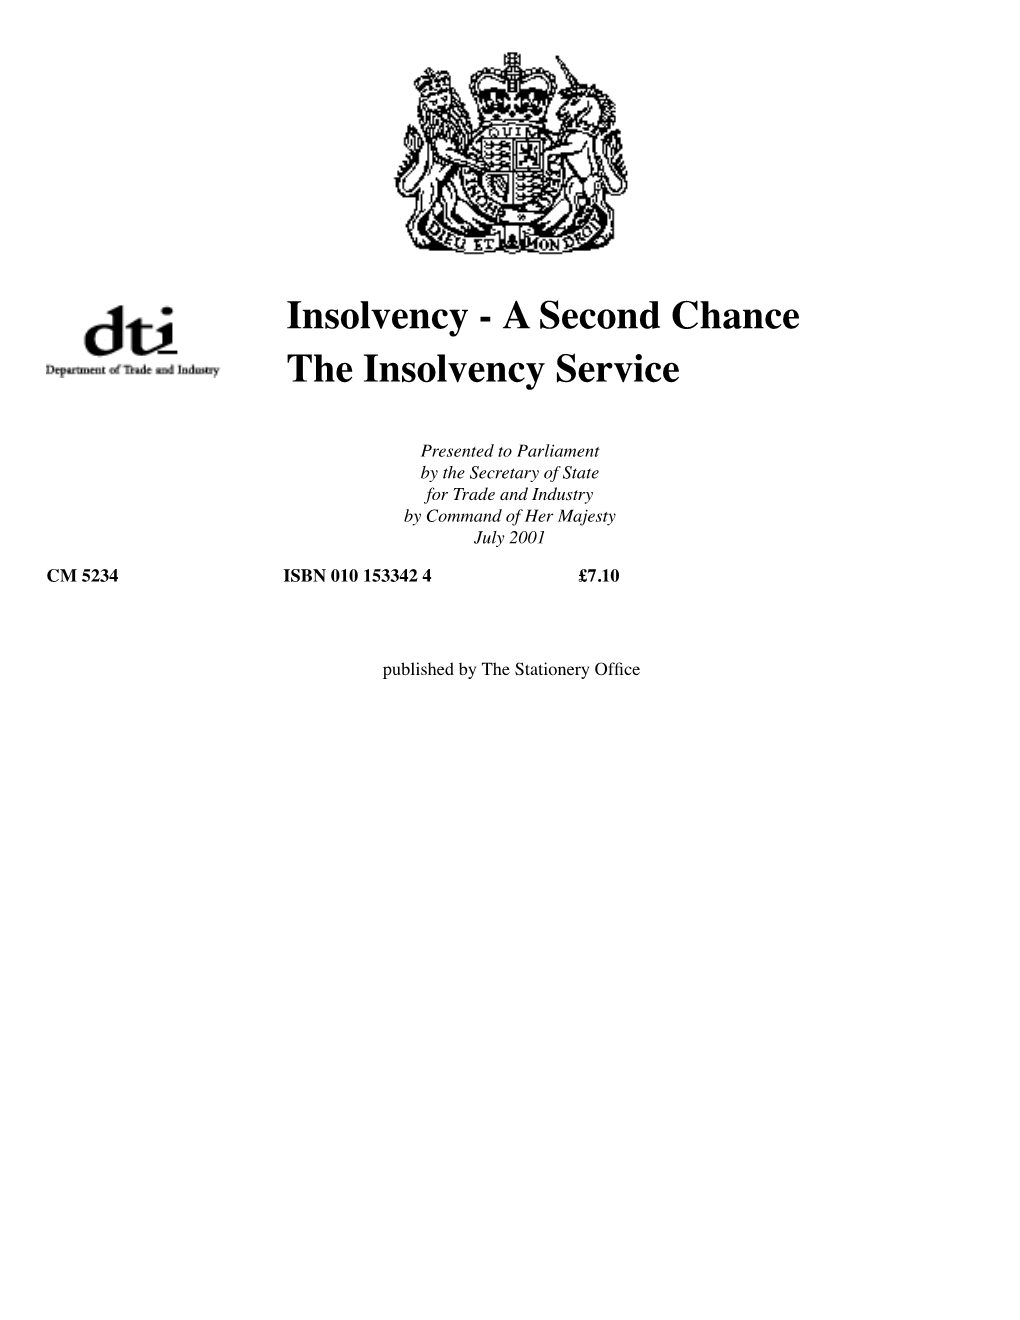 A Second Chance the Insolvency Service